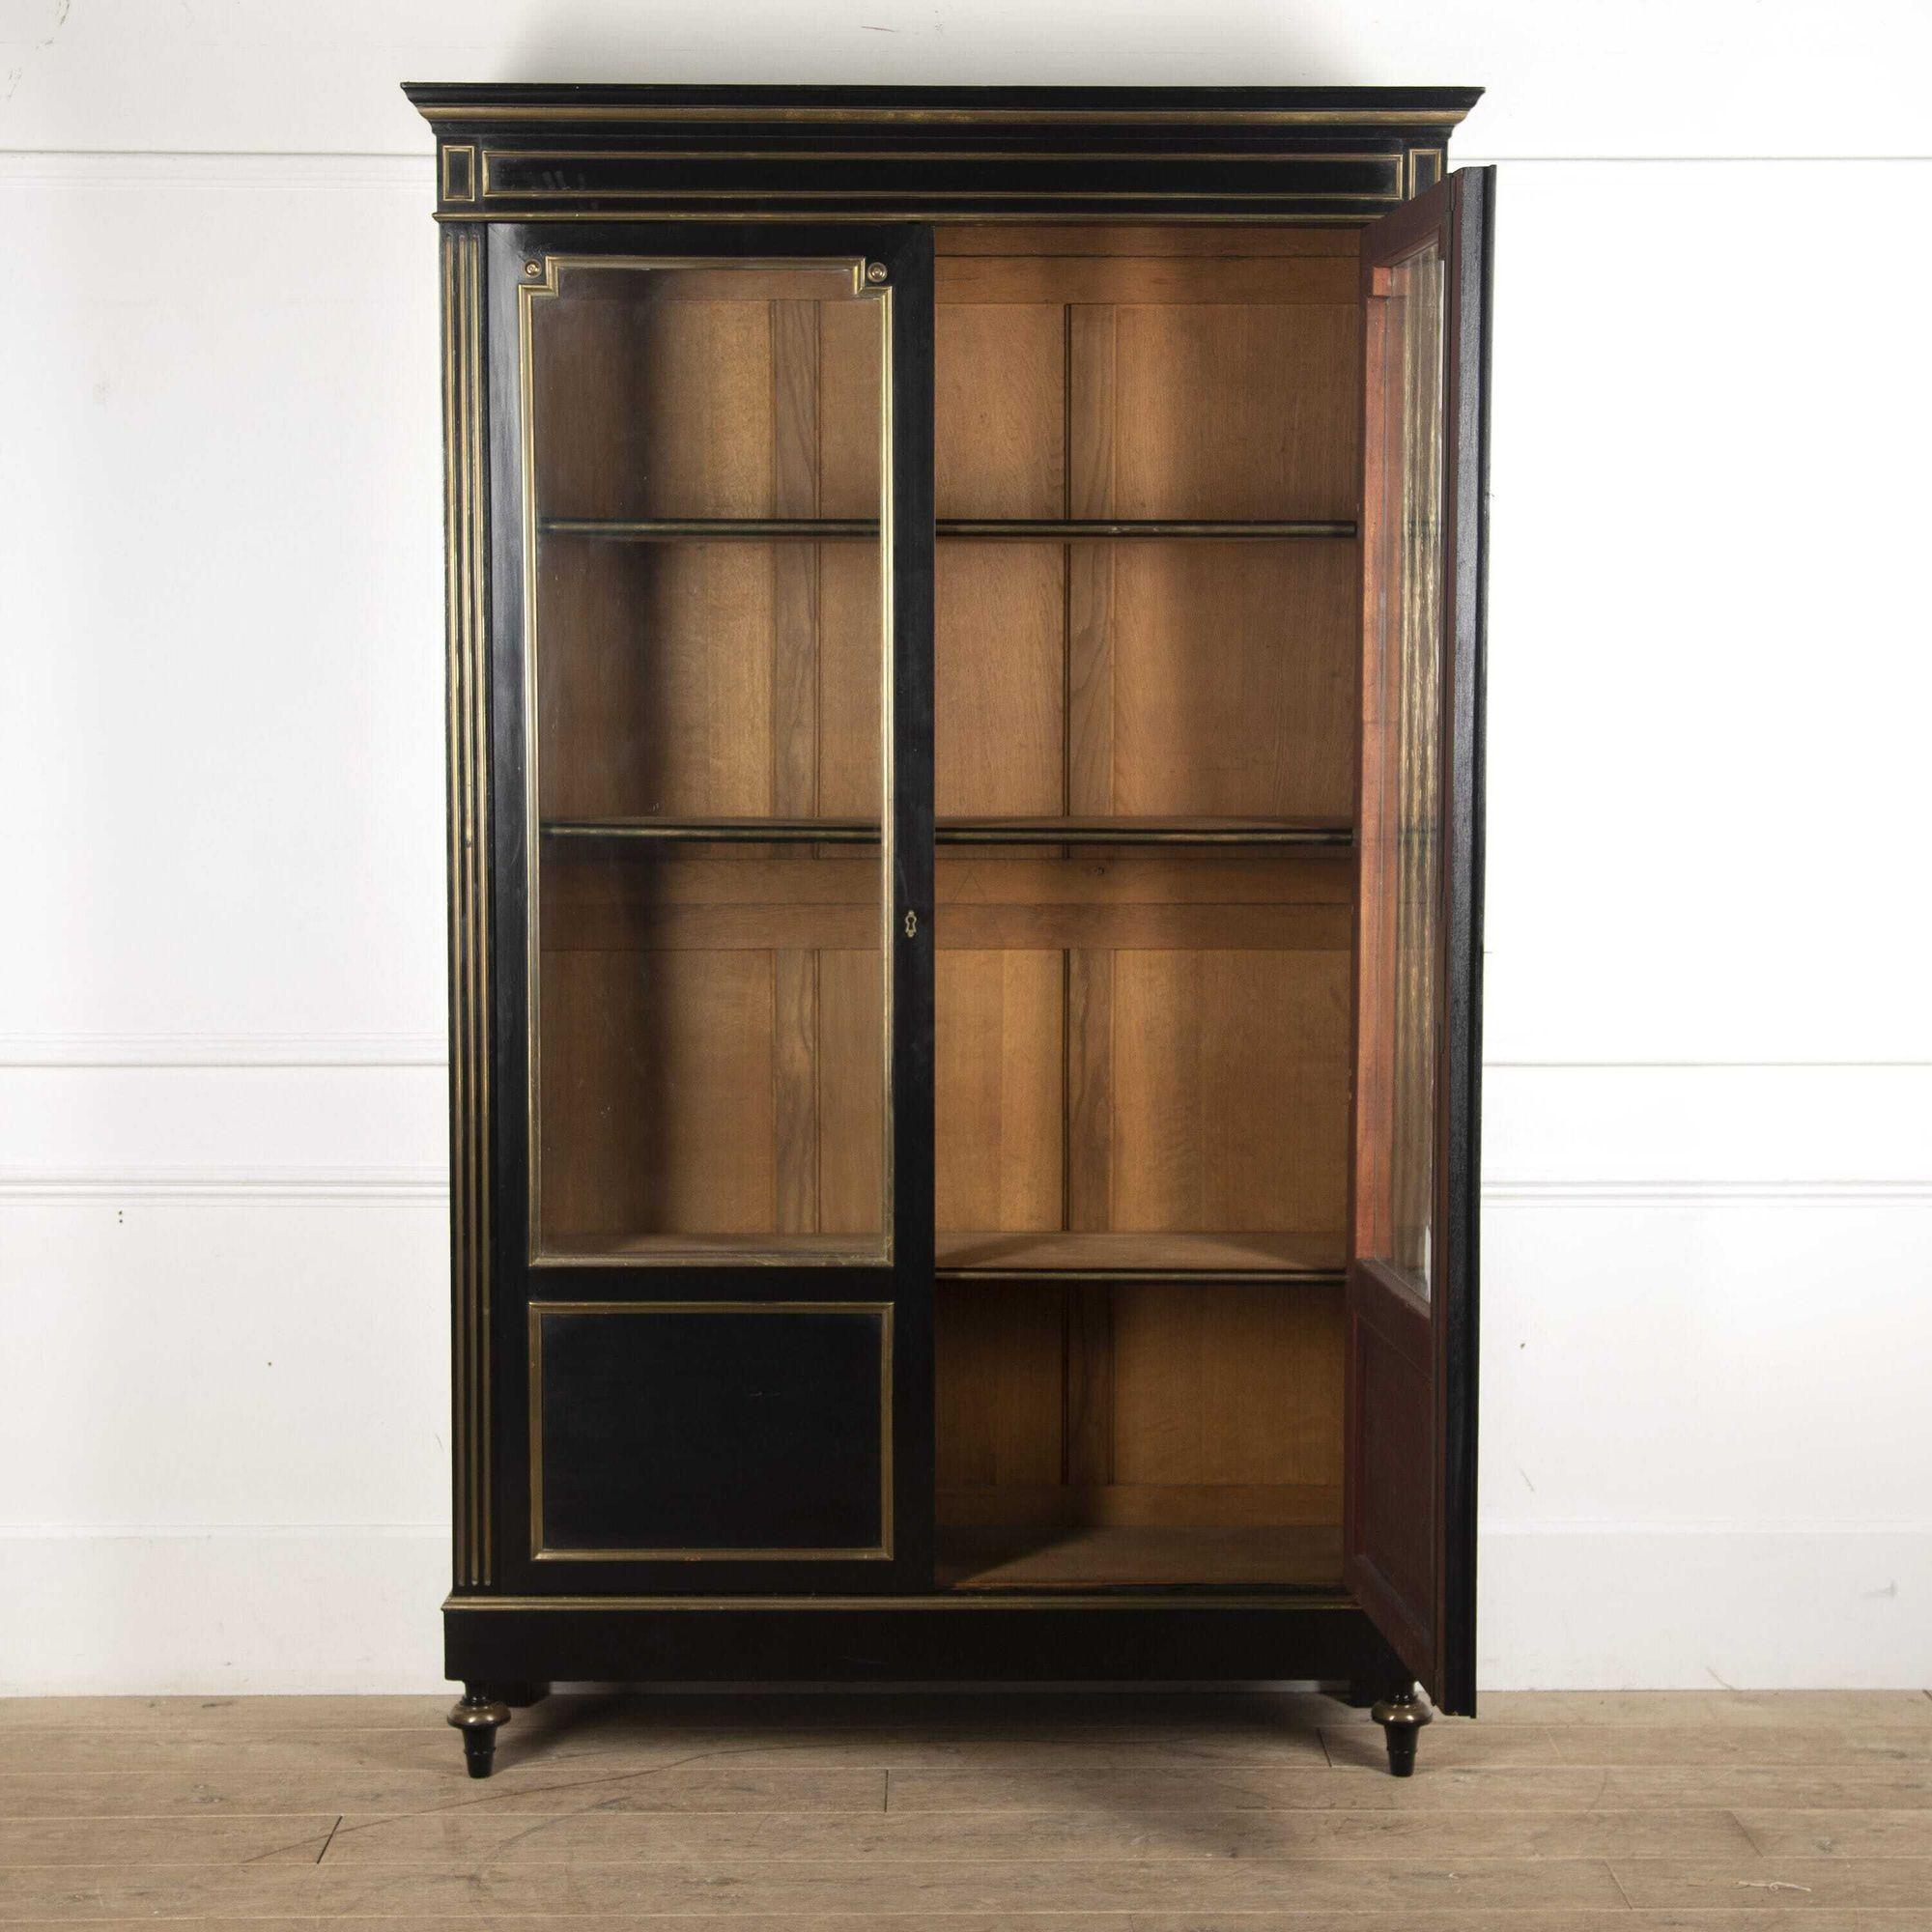 Fantastic French two-door ebonised bookcase with brass detail.
This bookcase dates from the early 20th Century and has two glazed and panel doors and adjustable internal shelves. This bookcase can be dissembled with ease for storage or ease of